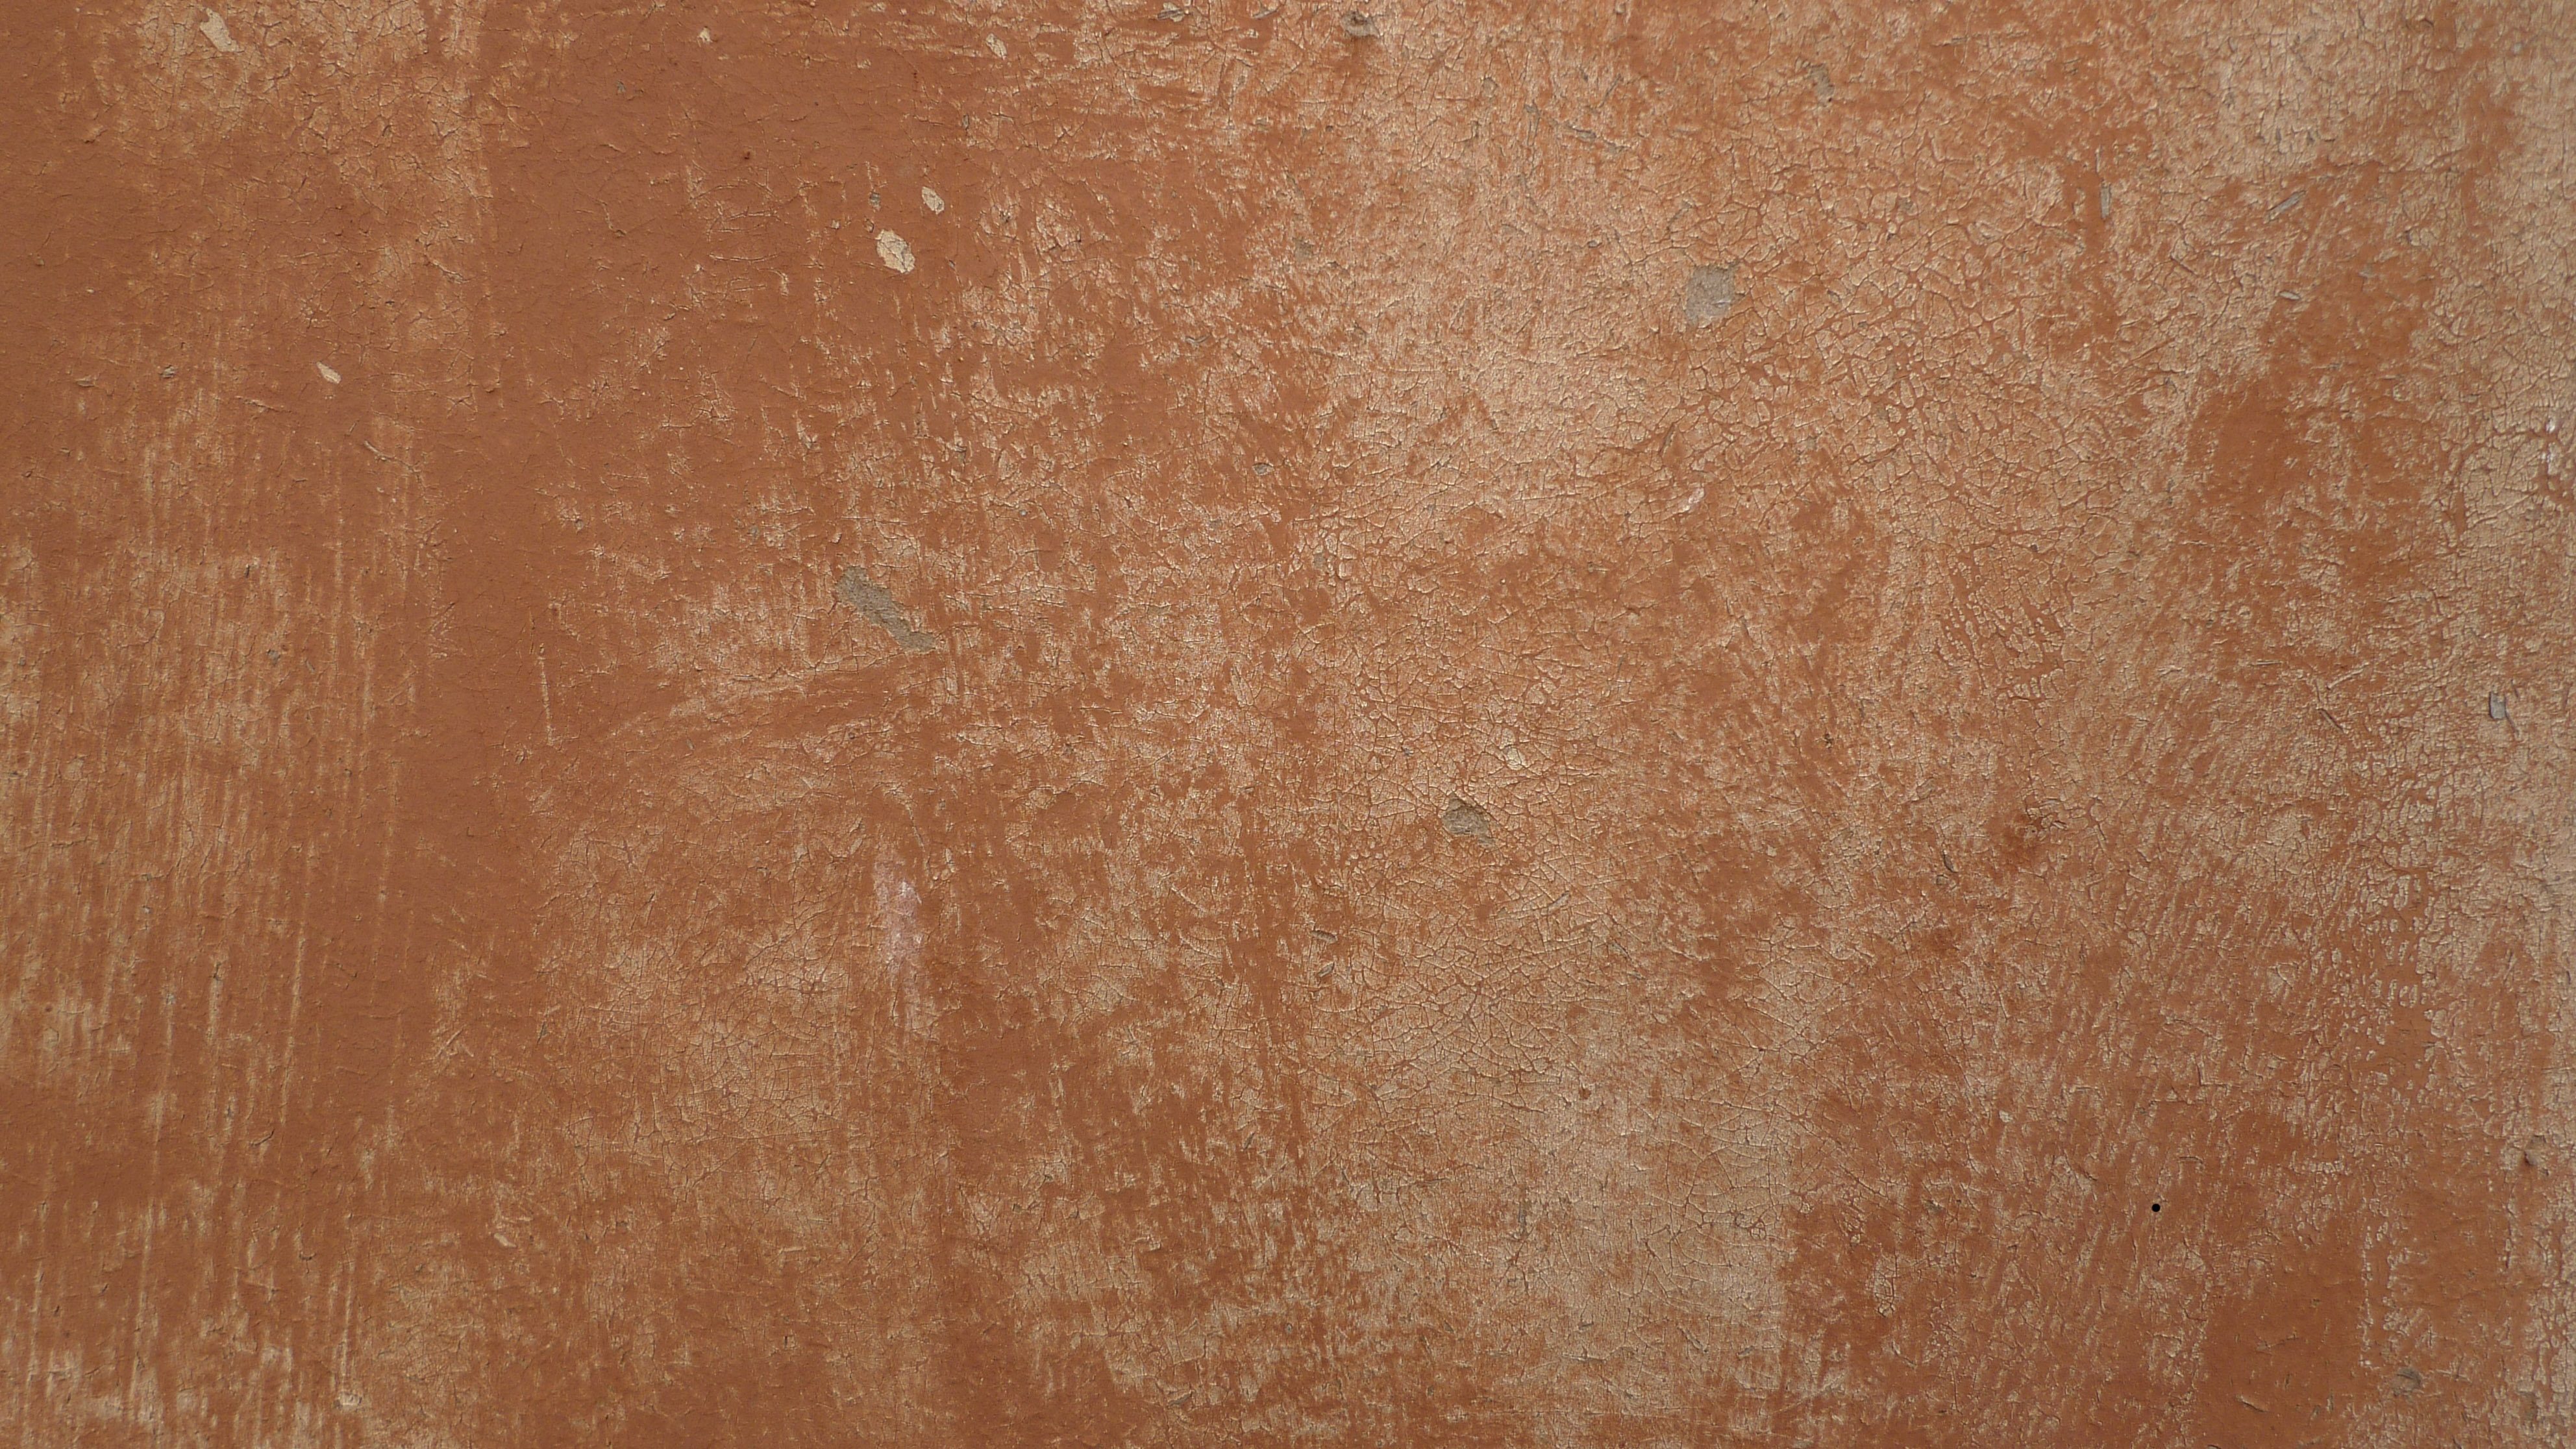 Brown cracked painted wall texture | Textures for photoshop free